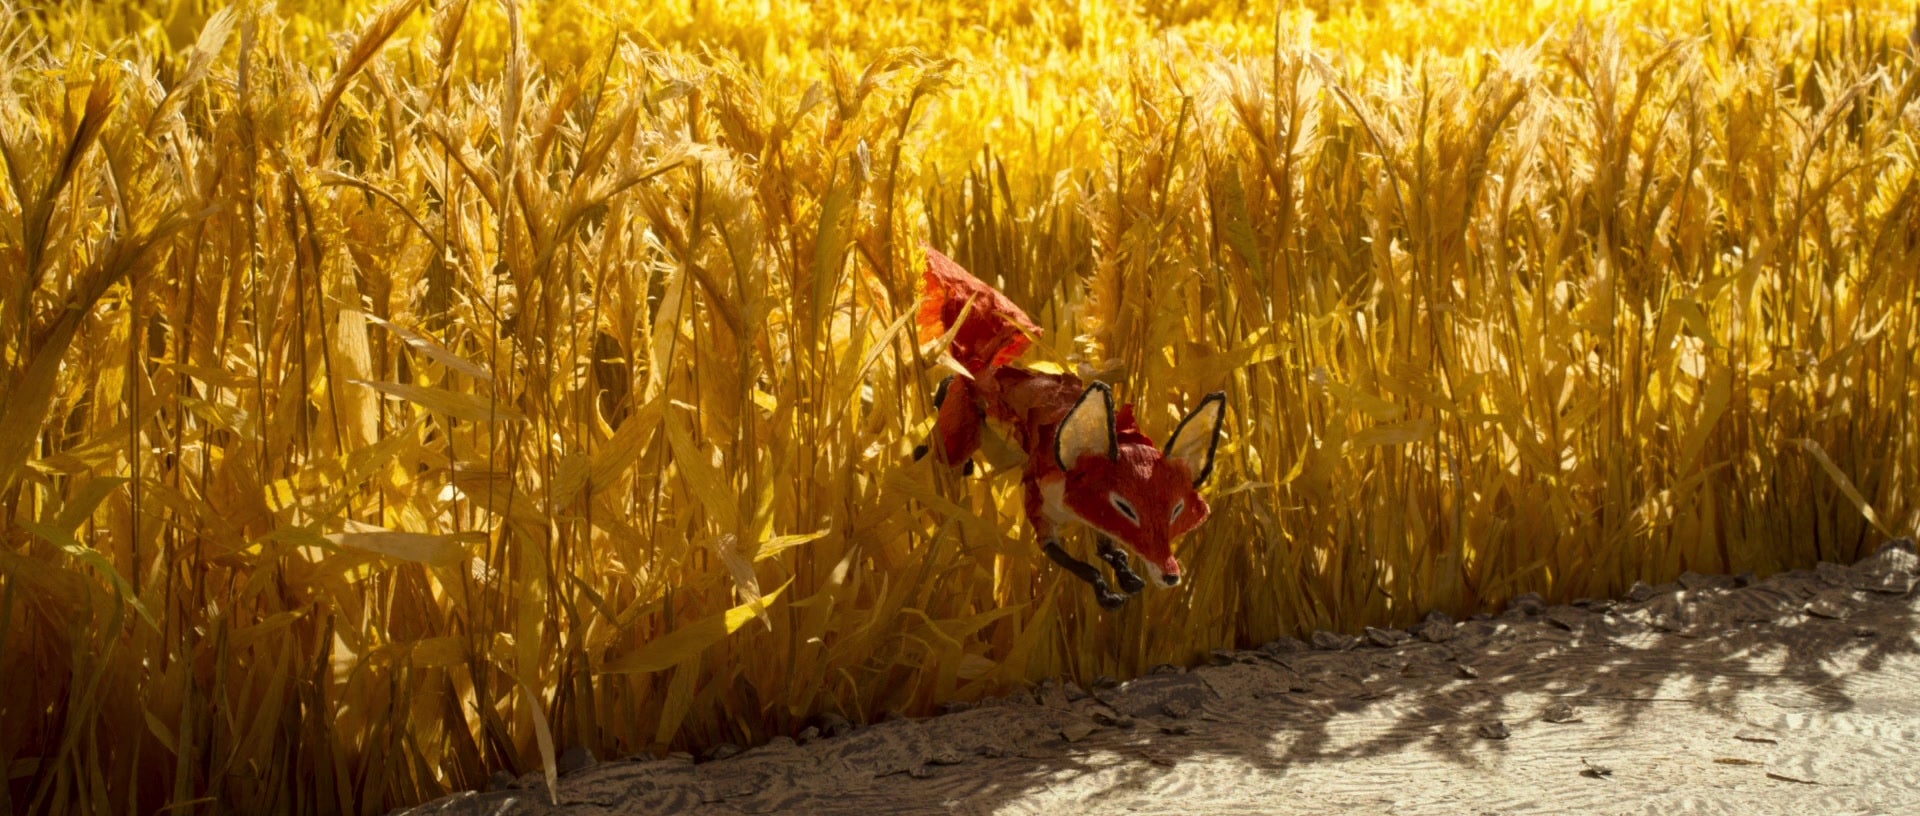 The fox runing out of the wheat field